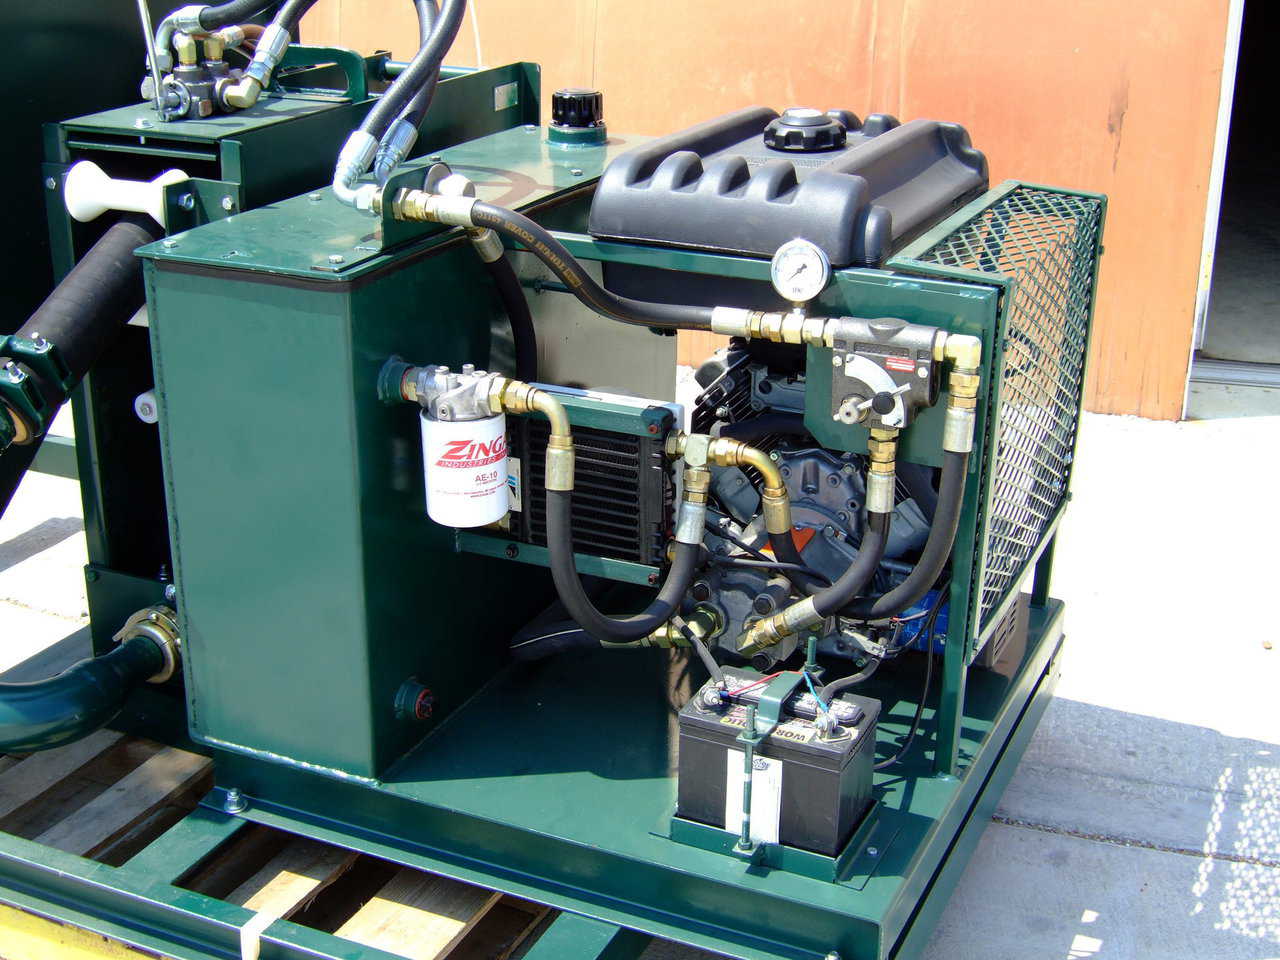 Power Unit — This 20 HP power pack is driven by a Honda motor and features a hydraulic cooling unit, variable flow control, electric start, and a 5 gallon fuel tank.